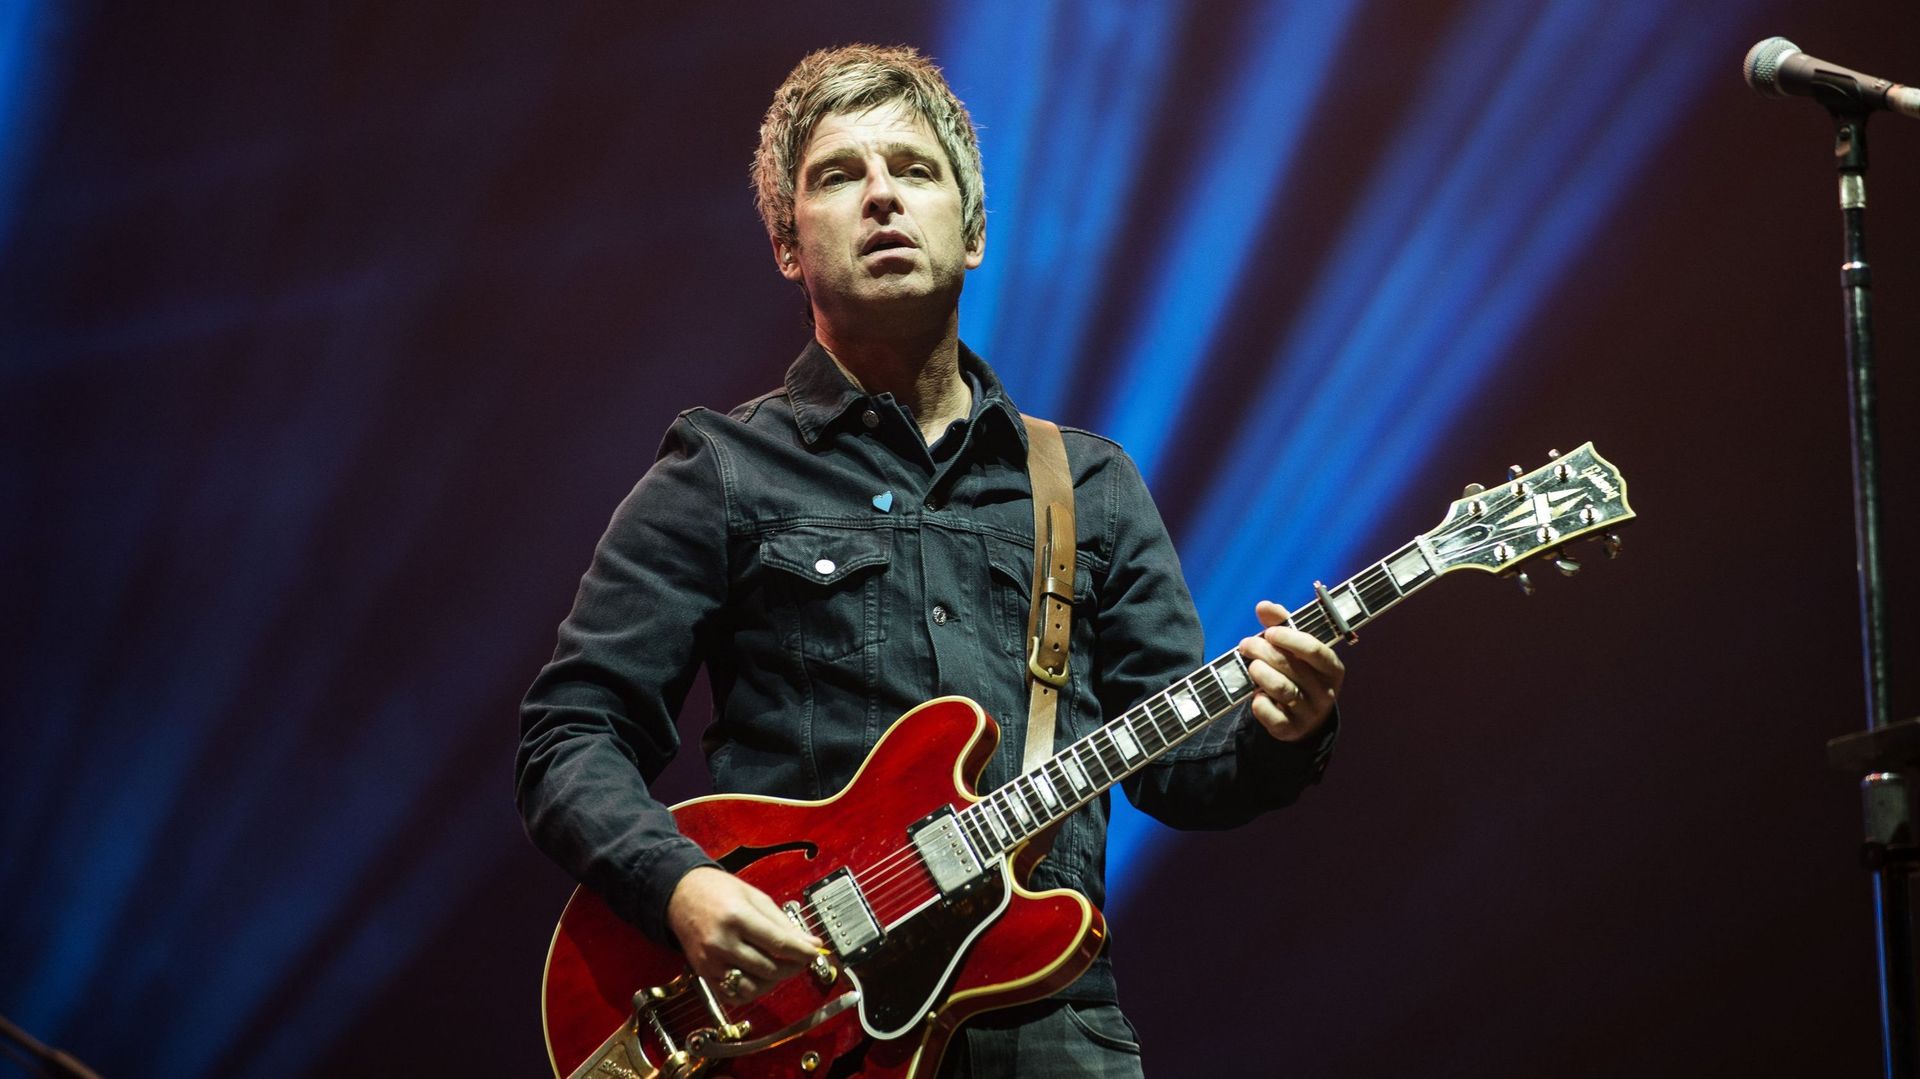 Noel Gallagher&#39;s High Flying Birds Perform At Bellahouston Park In Glasgow